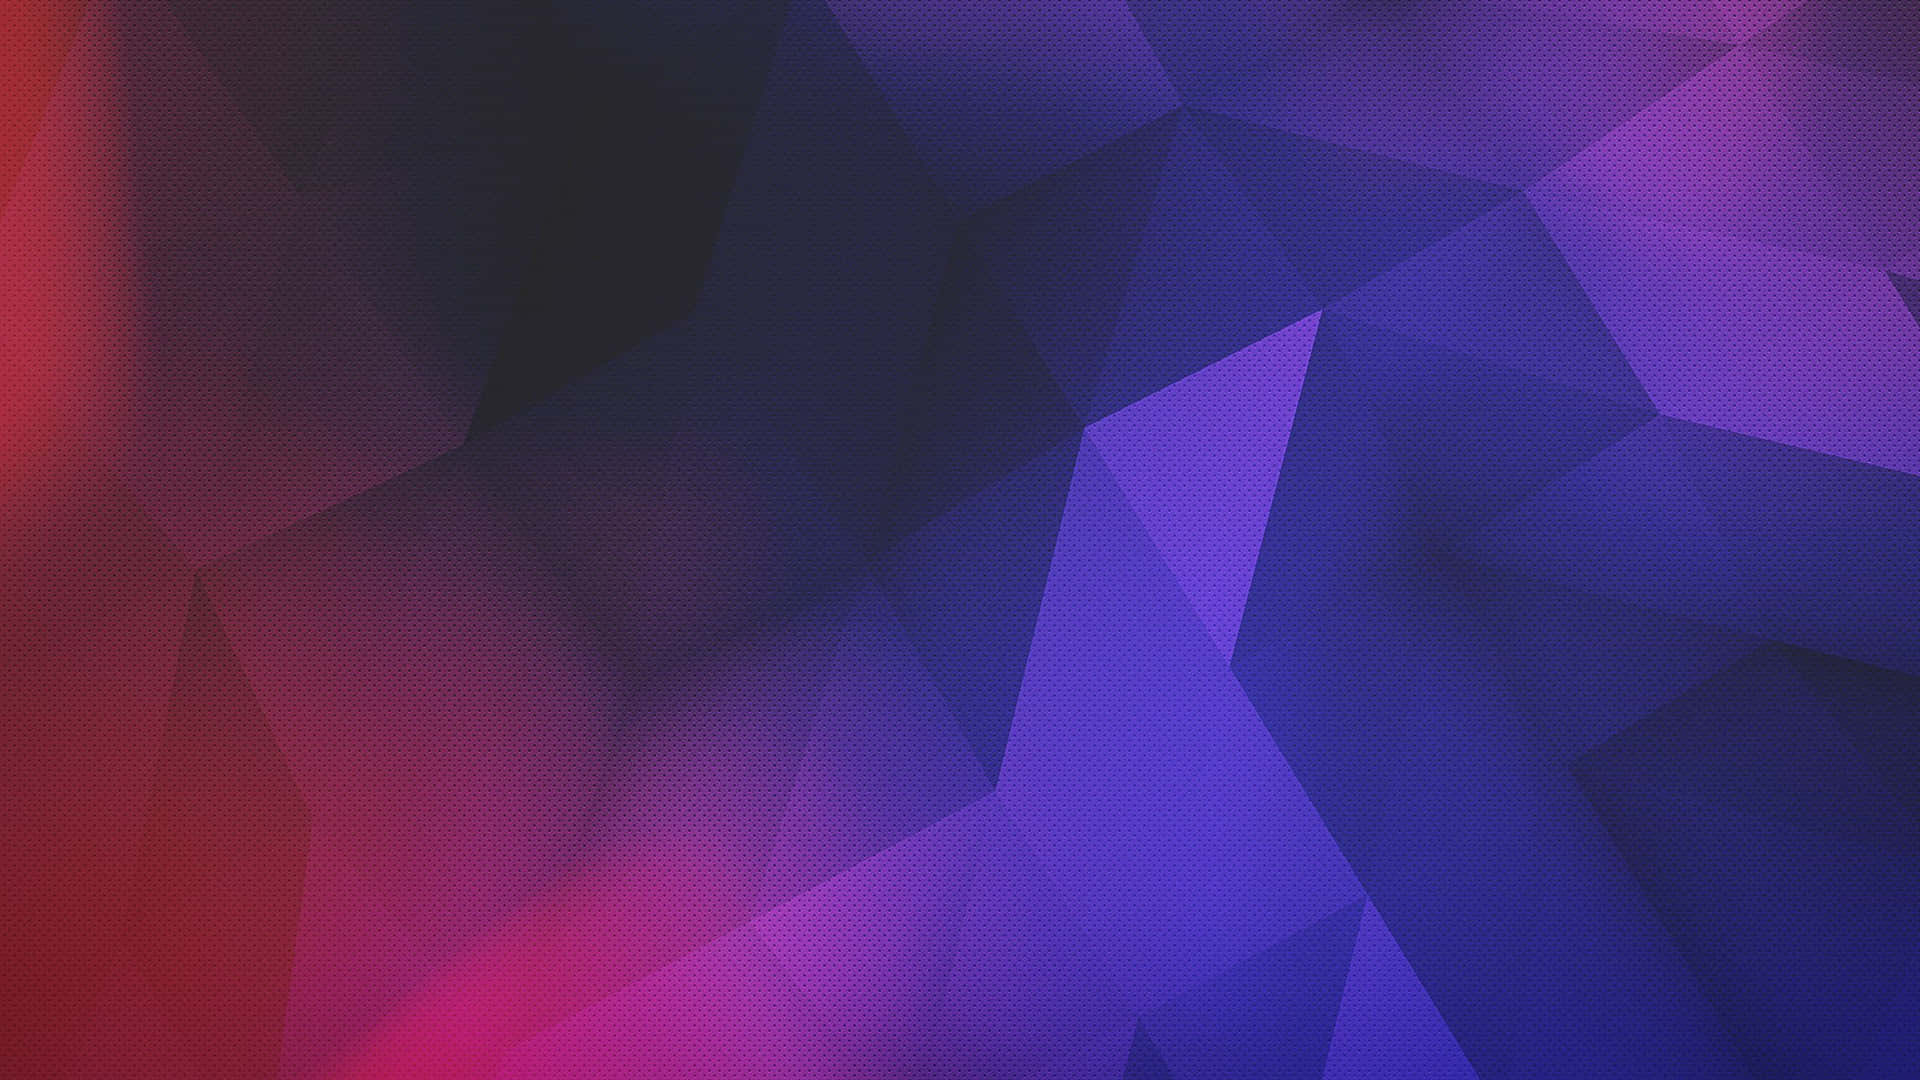 A Blue and Purple Desktop with a Laptop and Supplies Wallpaper